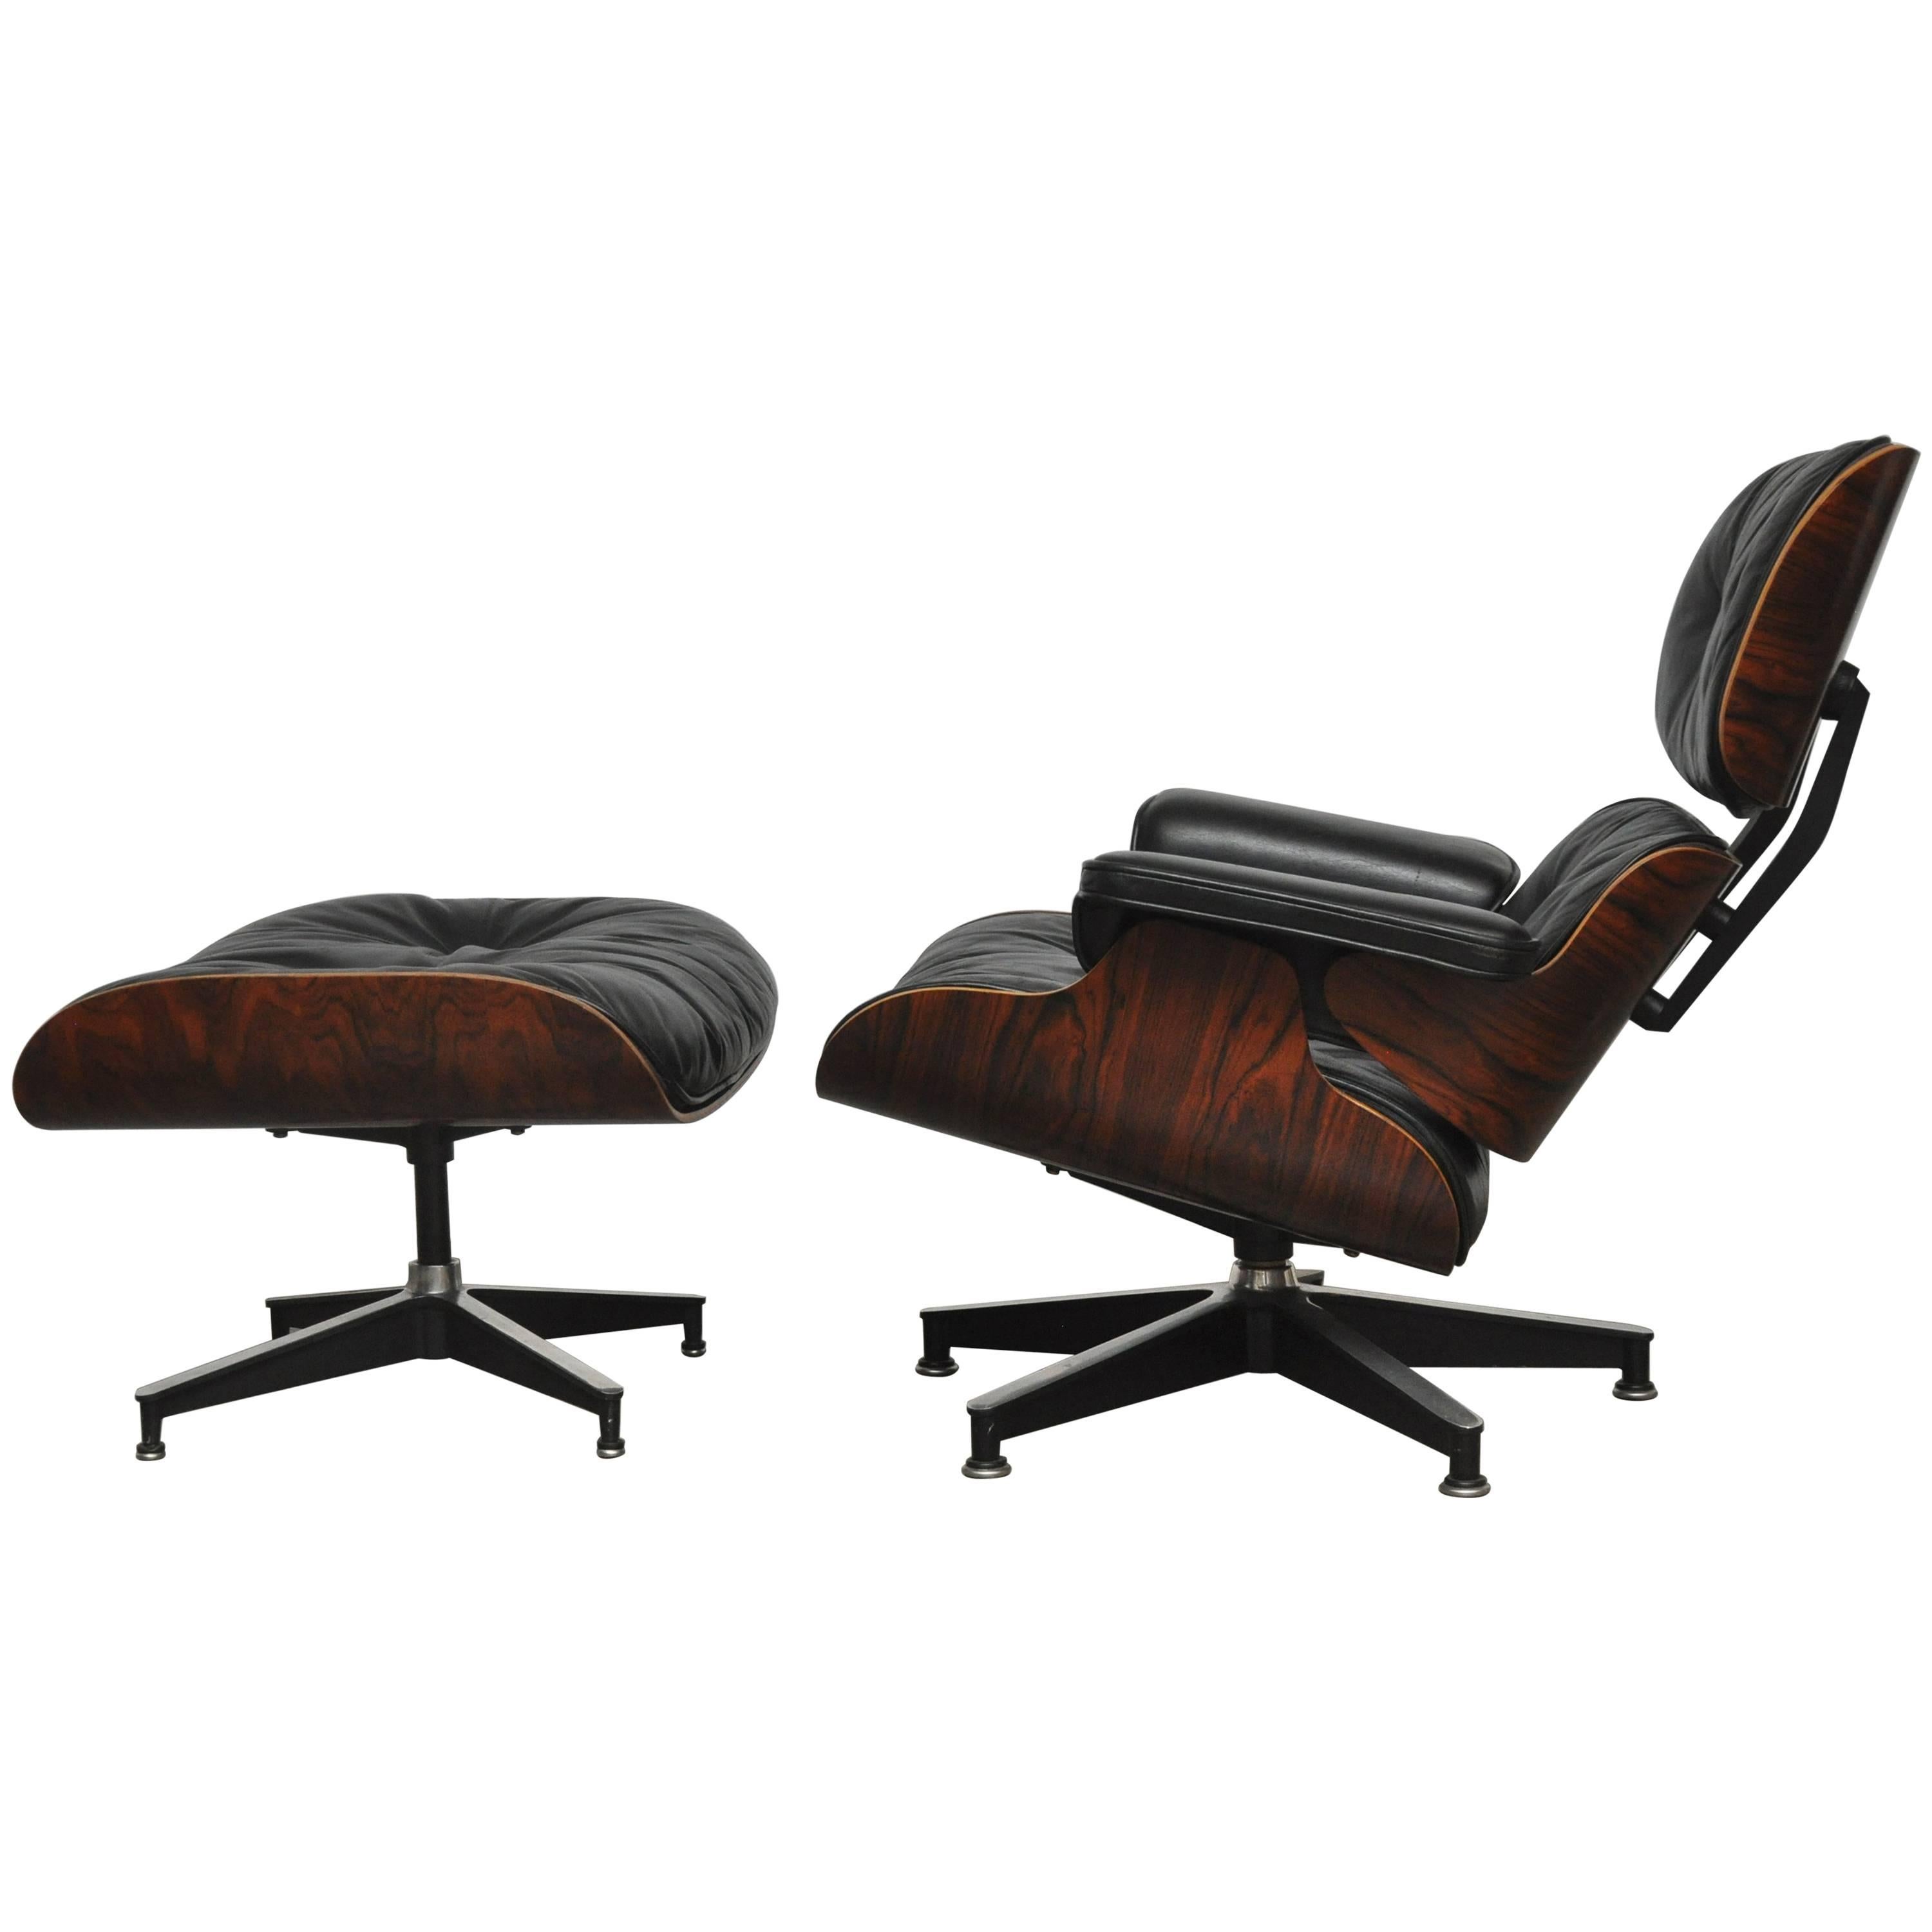 Early Rosewood Charles Eames Lounge Chair for Herman Miller